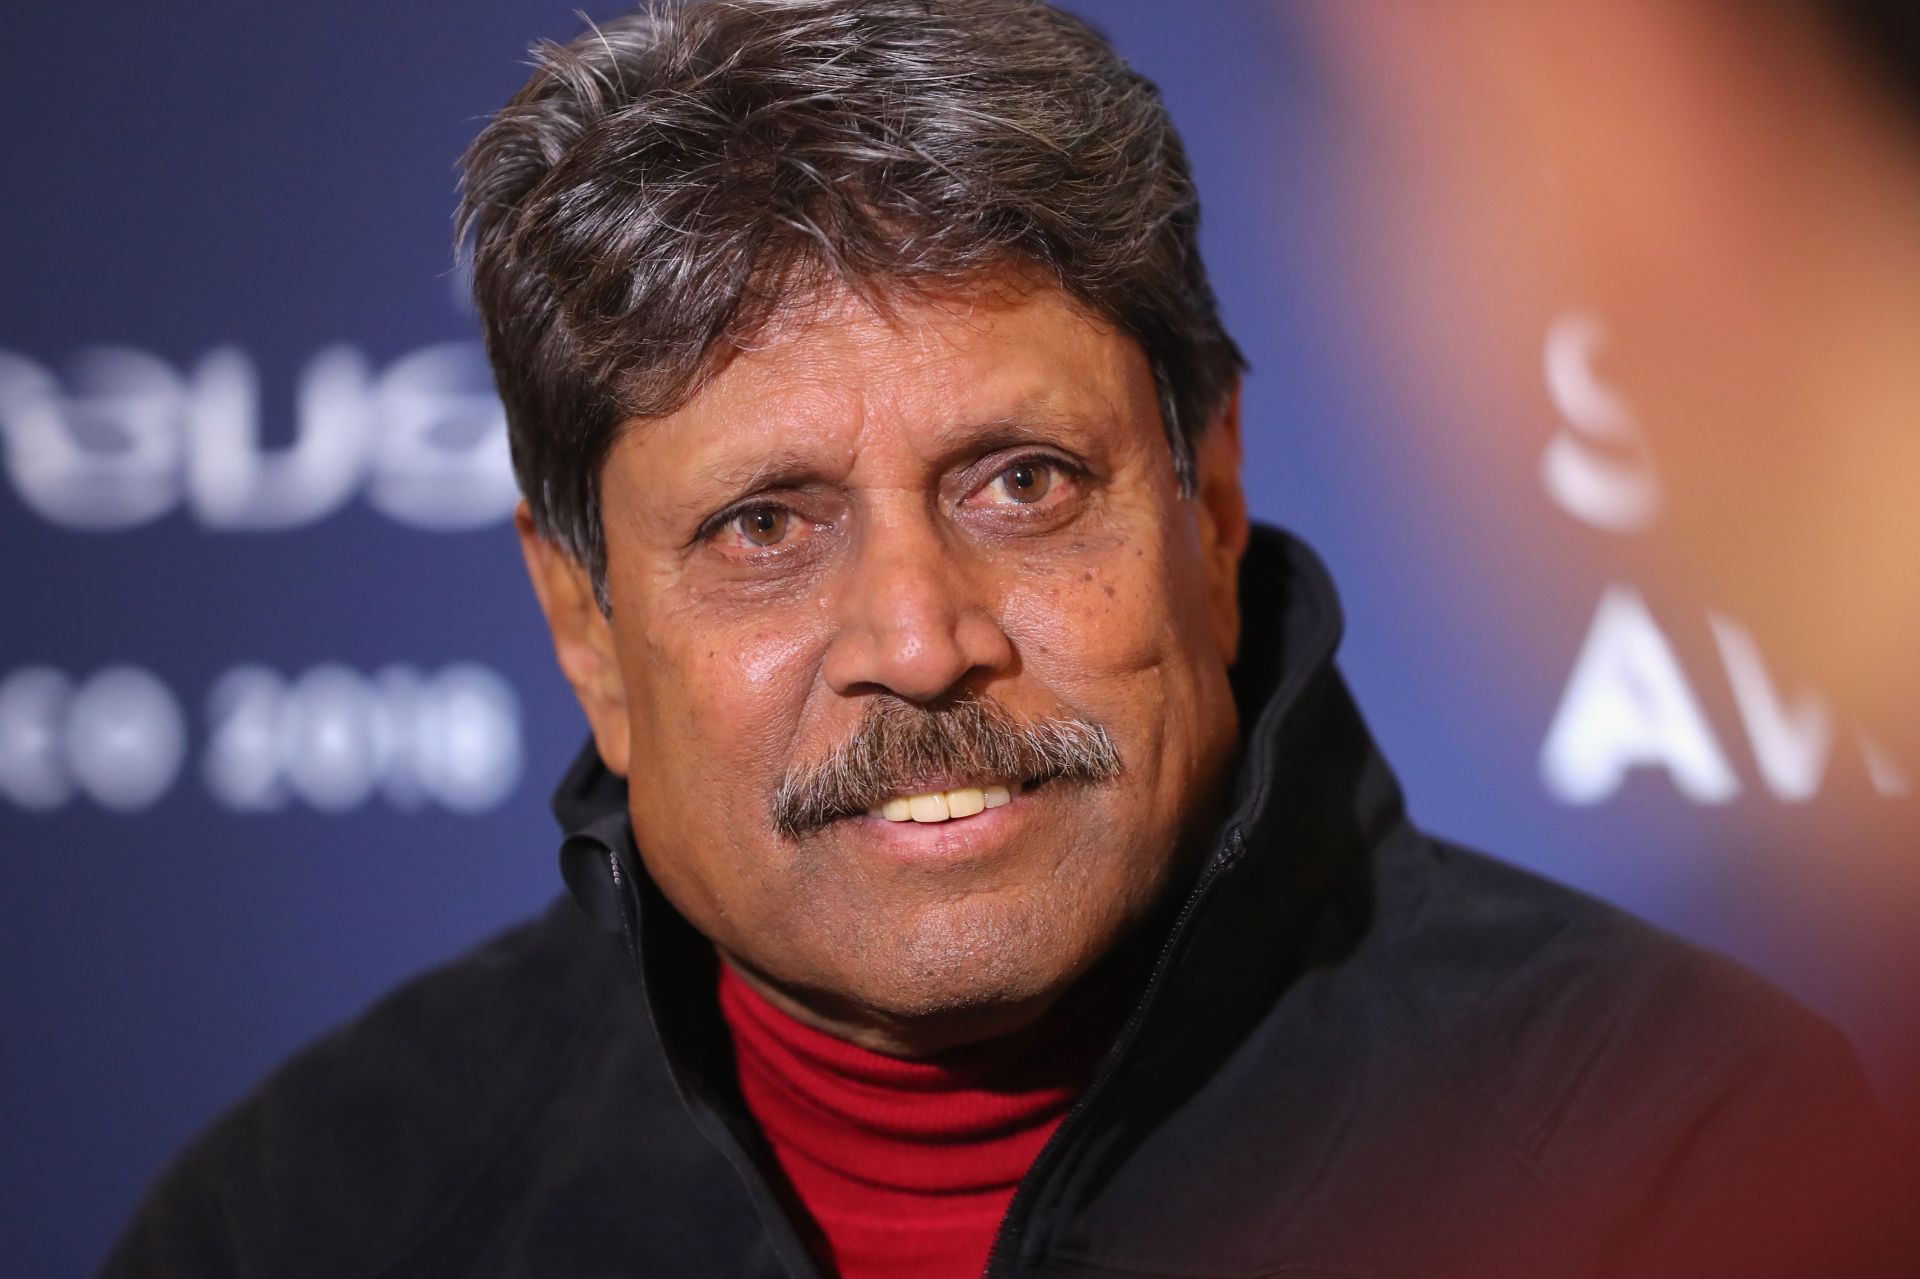 Kapil Dev was extremely critical of Kohli, who eventually proved him wrong